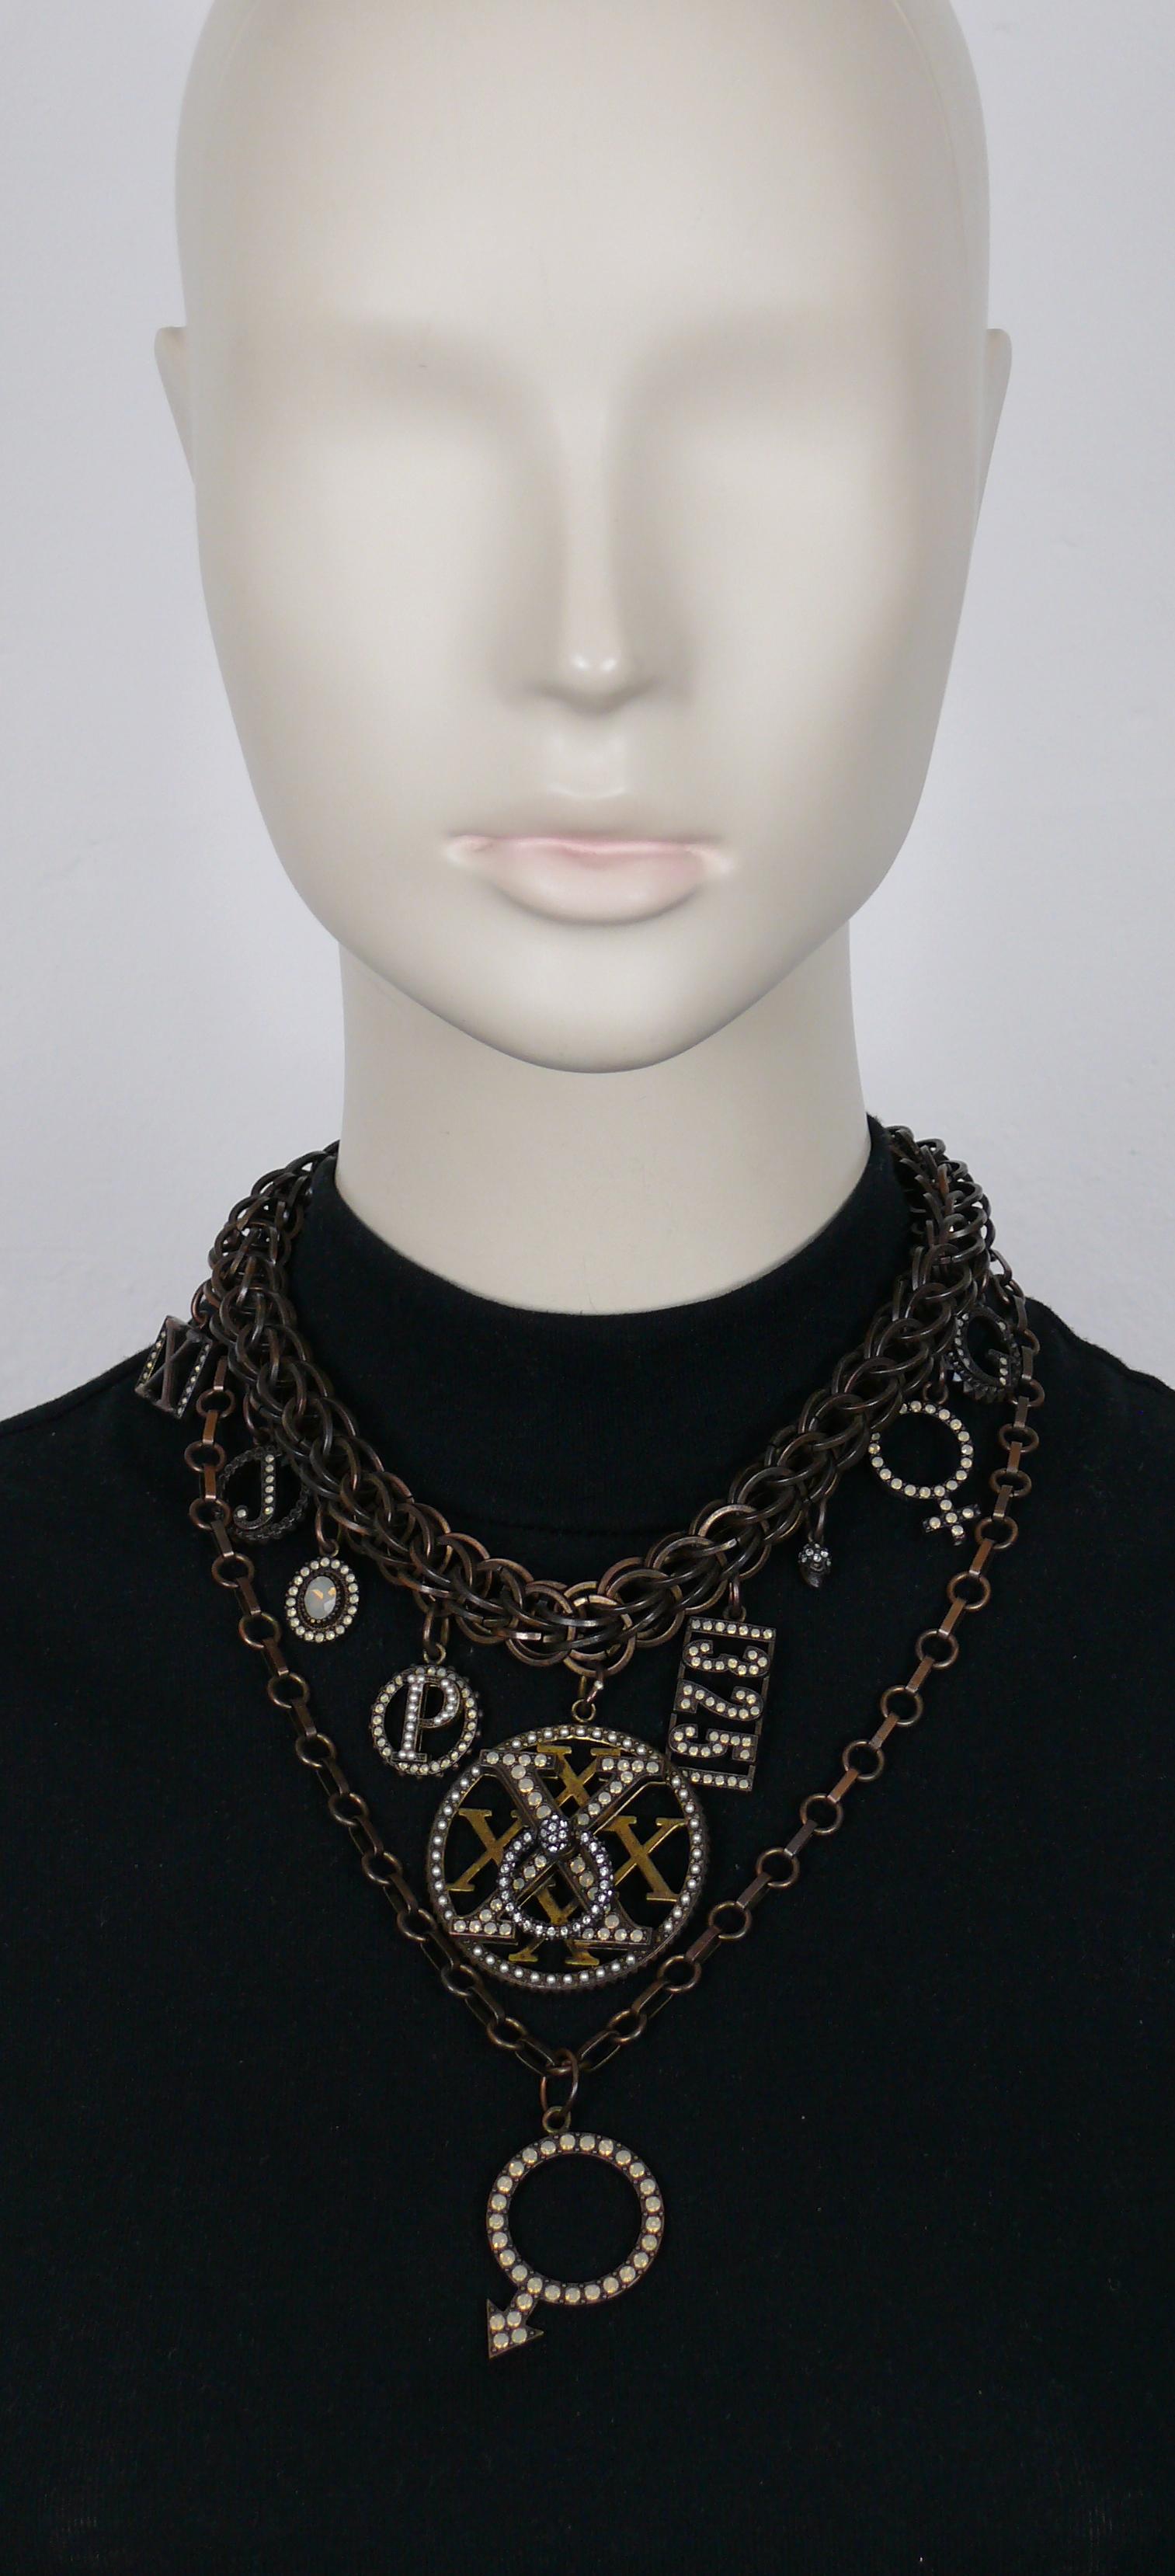 JEAN PAUL GAULTIER chunky antiqued bronze tone chain necklace featuring various charms embellished with opalescent crystals, clear crystals and faux pearls.

Secure push clasp closure.

J P G inital charms.
Unmarked.

Indicative measurements :